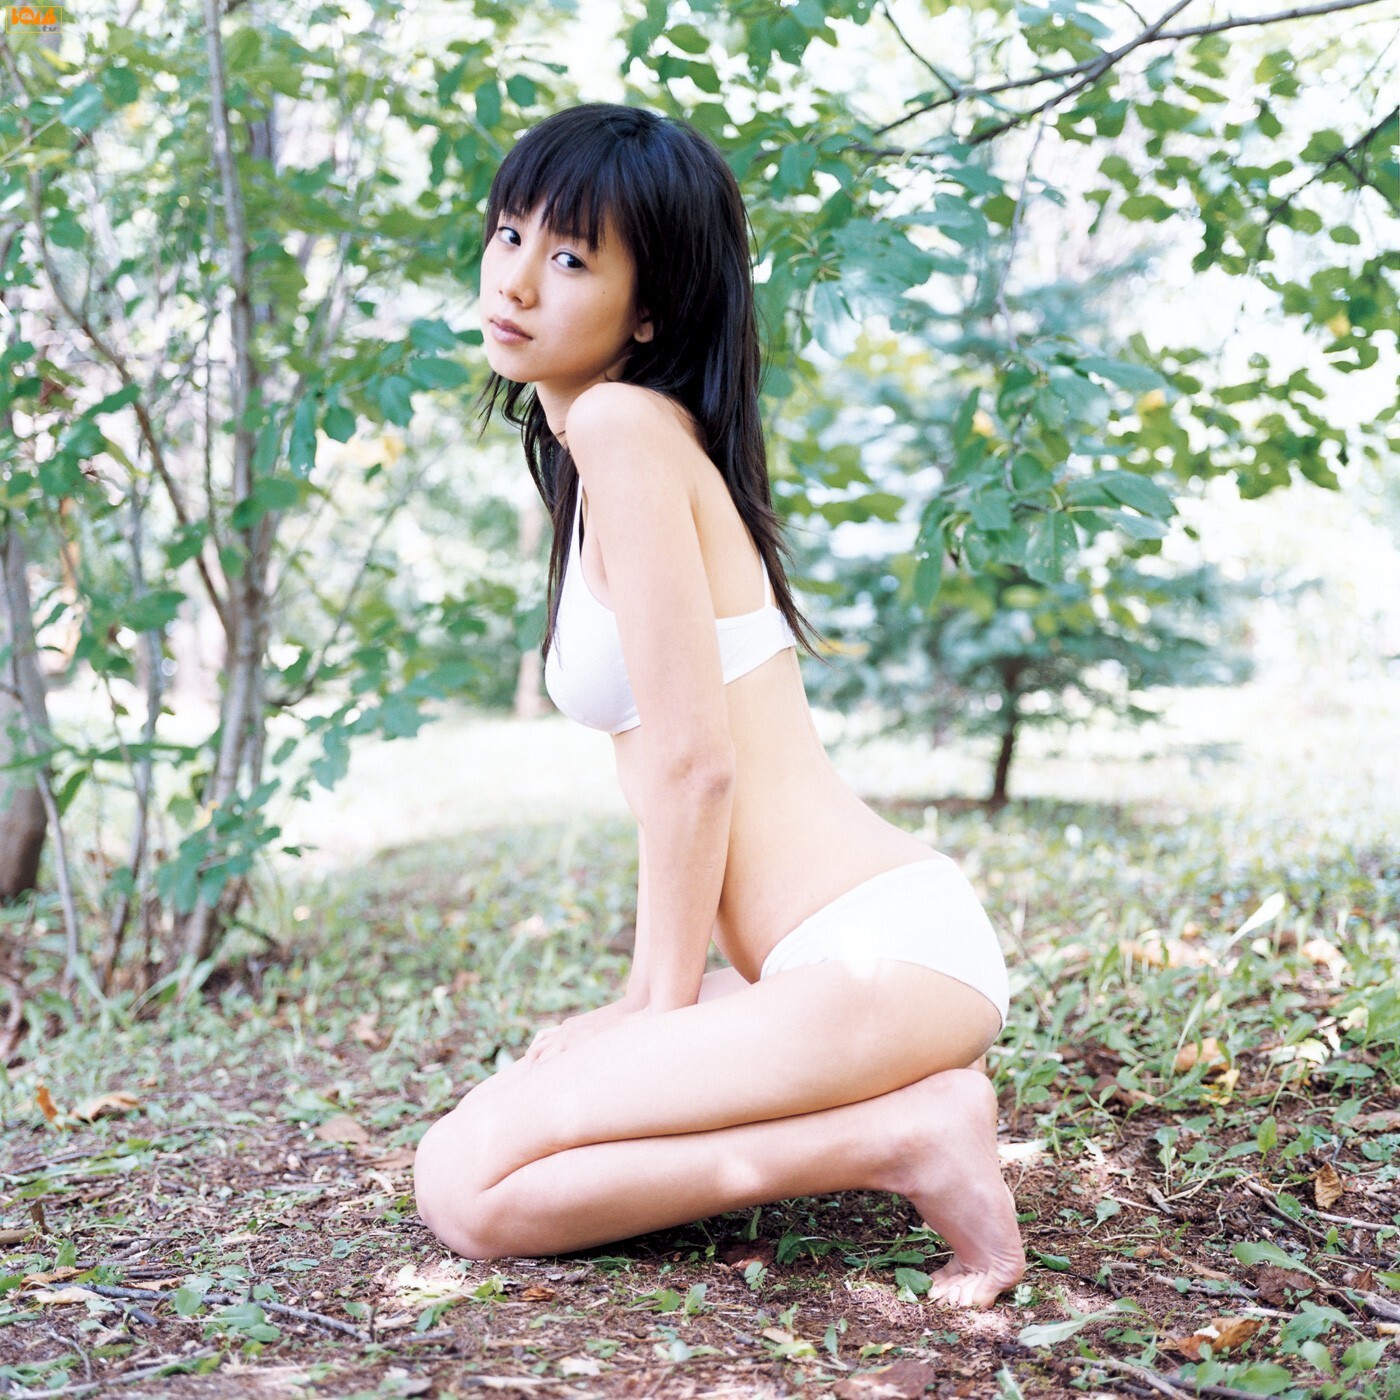 EMI Hasegawa Japanese beauty pictures Bomb.tv  Set of pictures